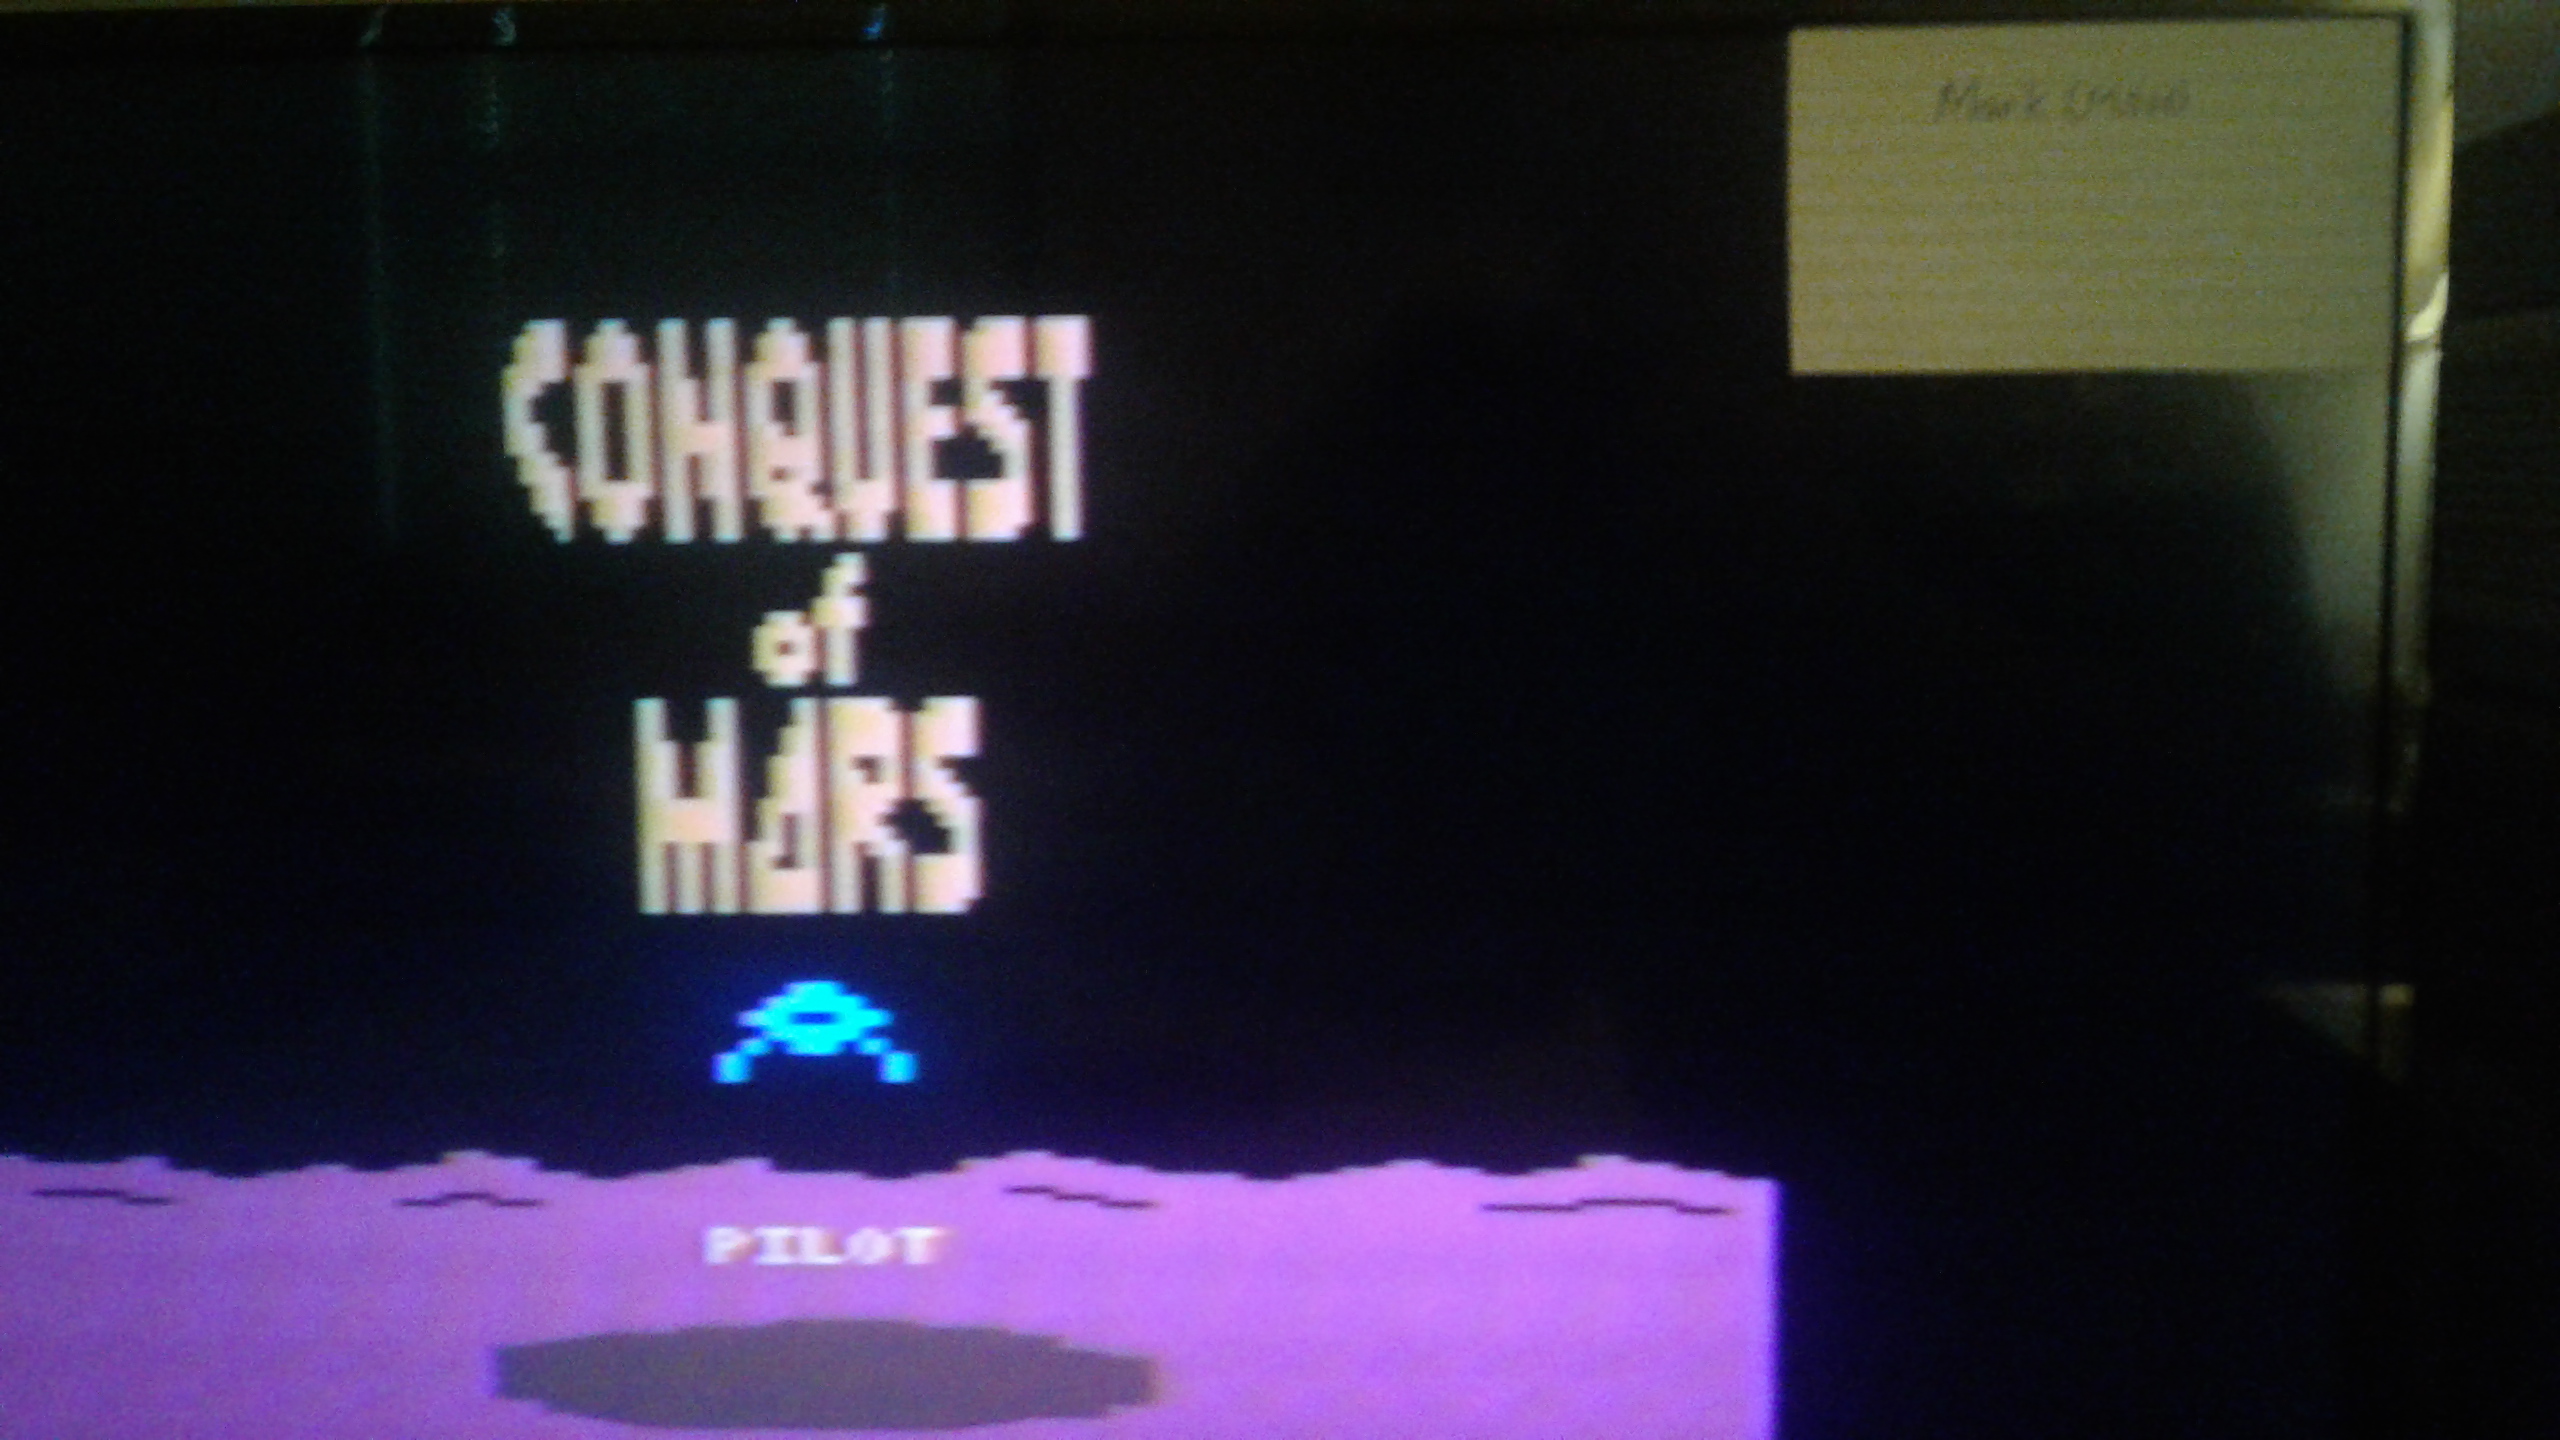 Mark: Conquest of Mars: Pilot (Atari 2600 Expert/A) 13,830 points on 2019-03-06 00:54:20